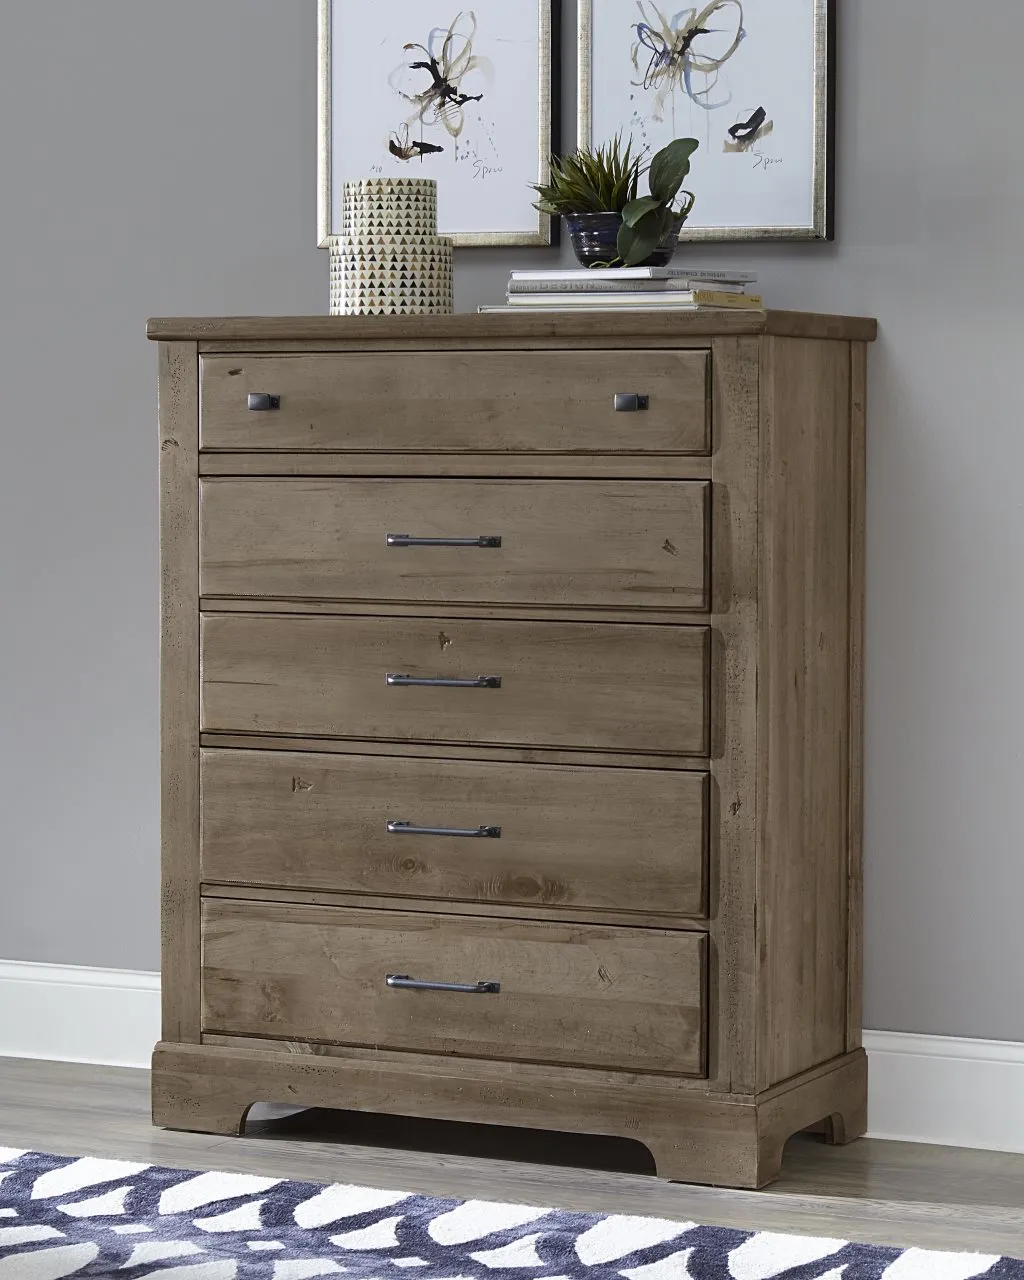 COOL RUSTIC 5 DRAWER CHEST - STONE GREY